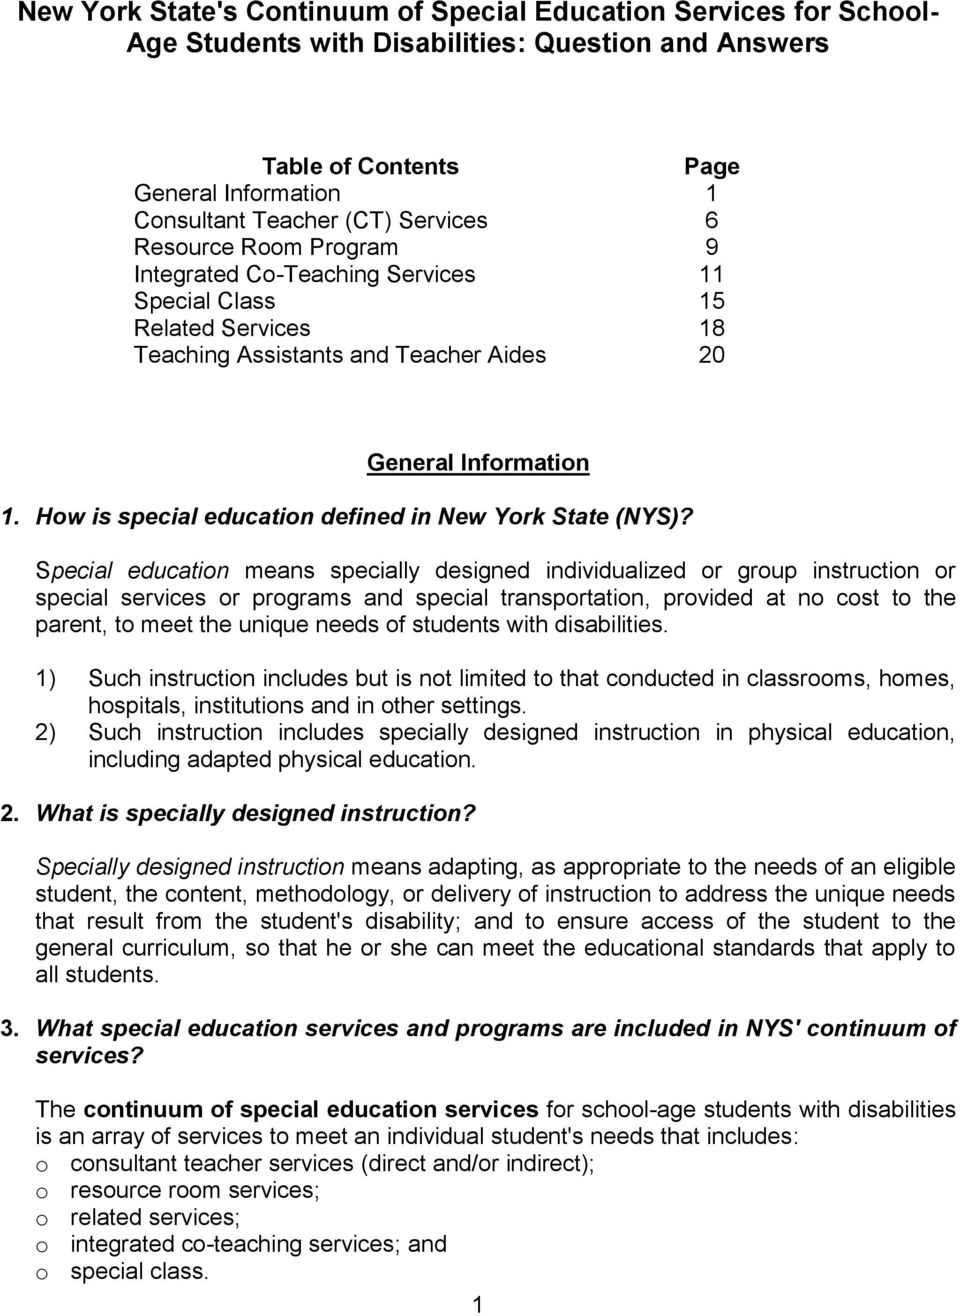 How is special education defined in New York State (NYS)?